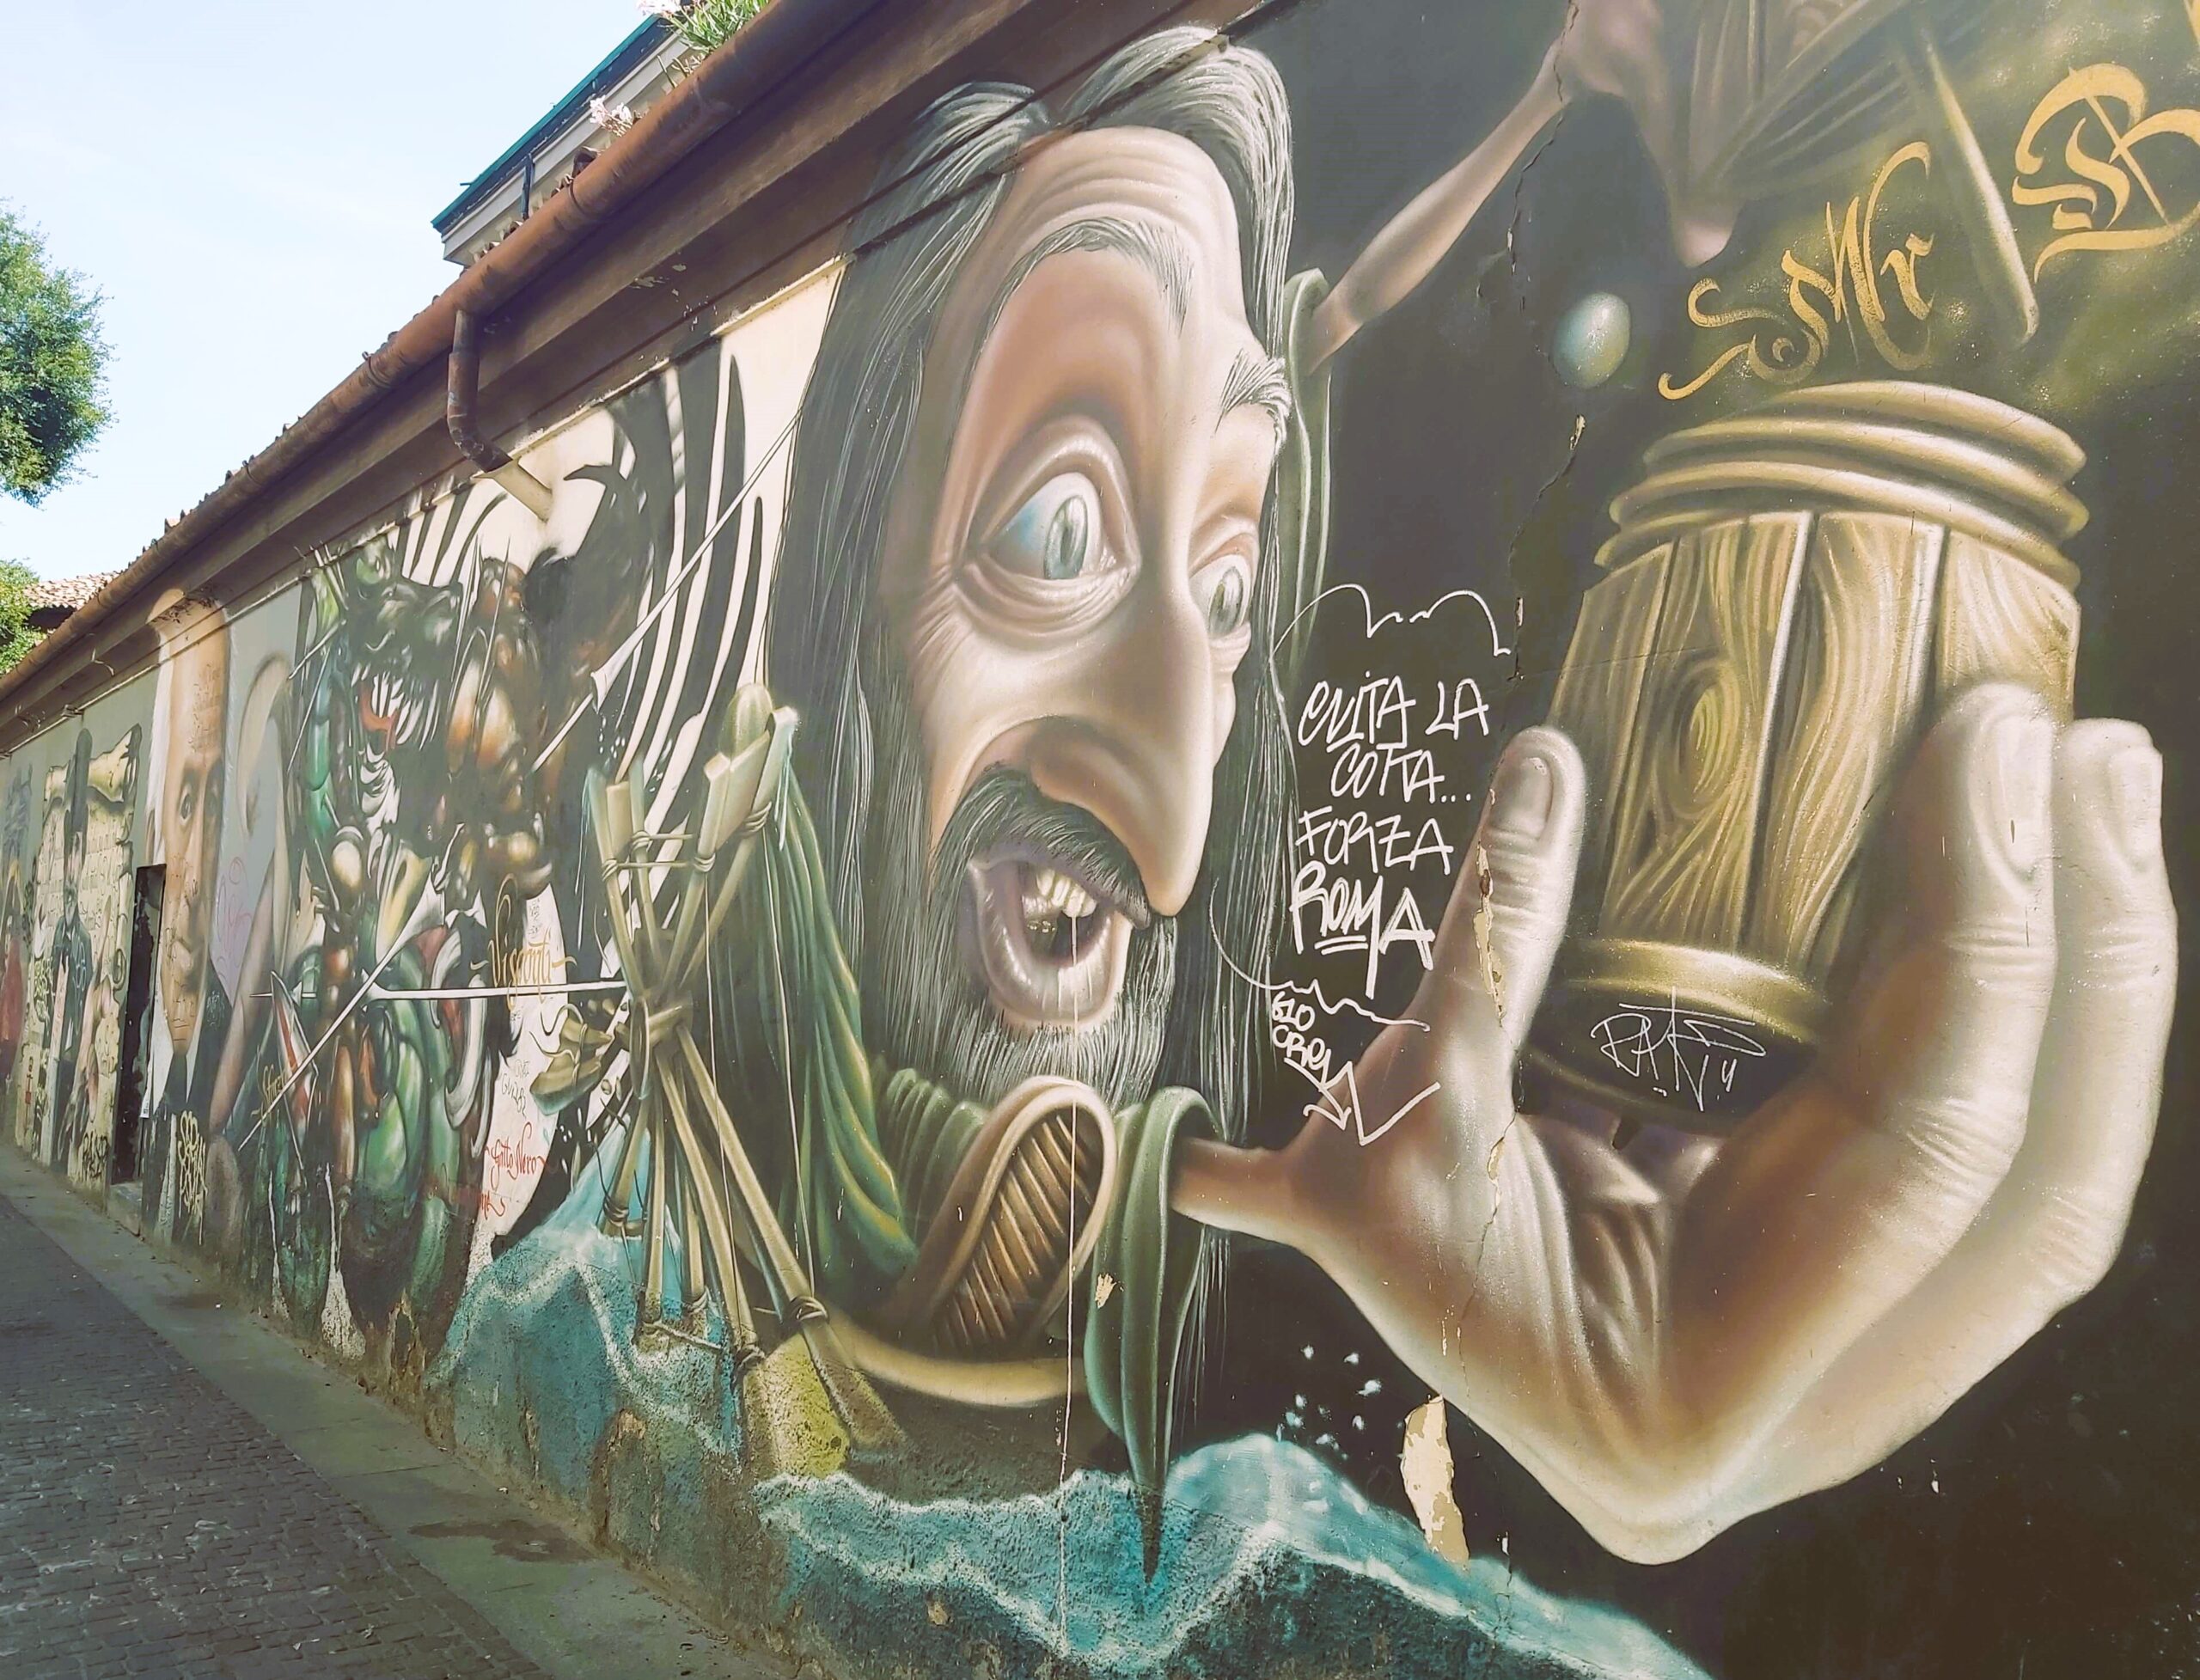 A graffiti image of a man holding a pot in Milan, Italy